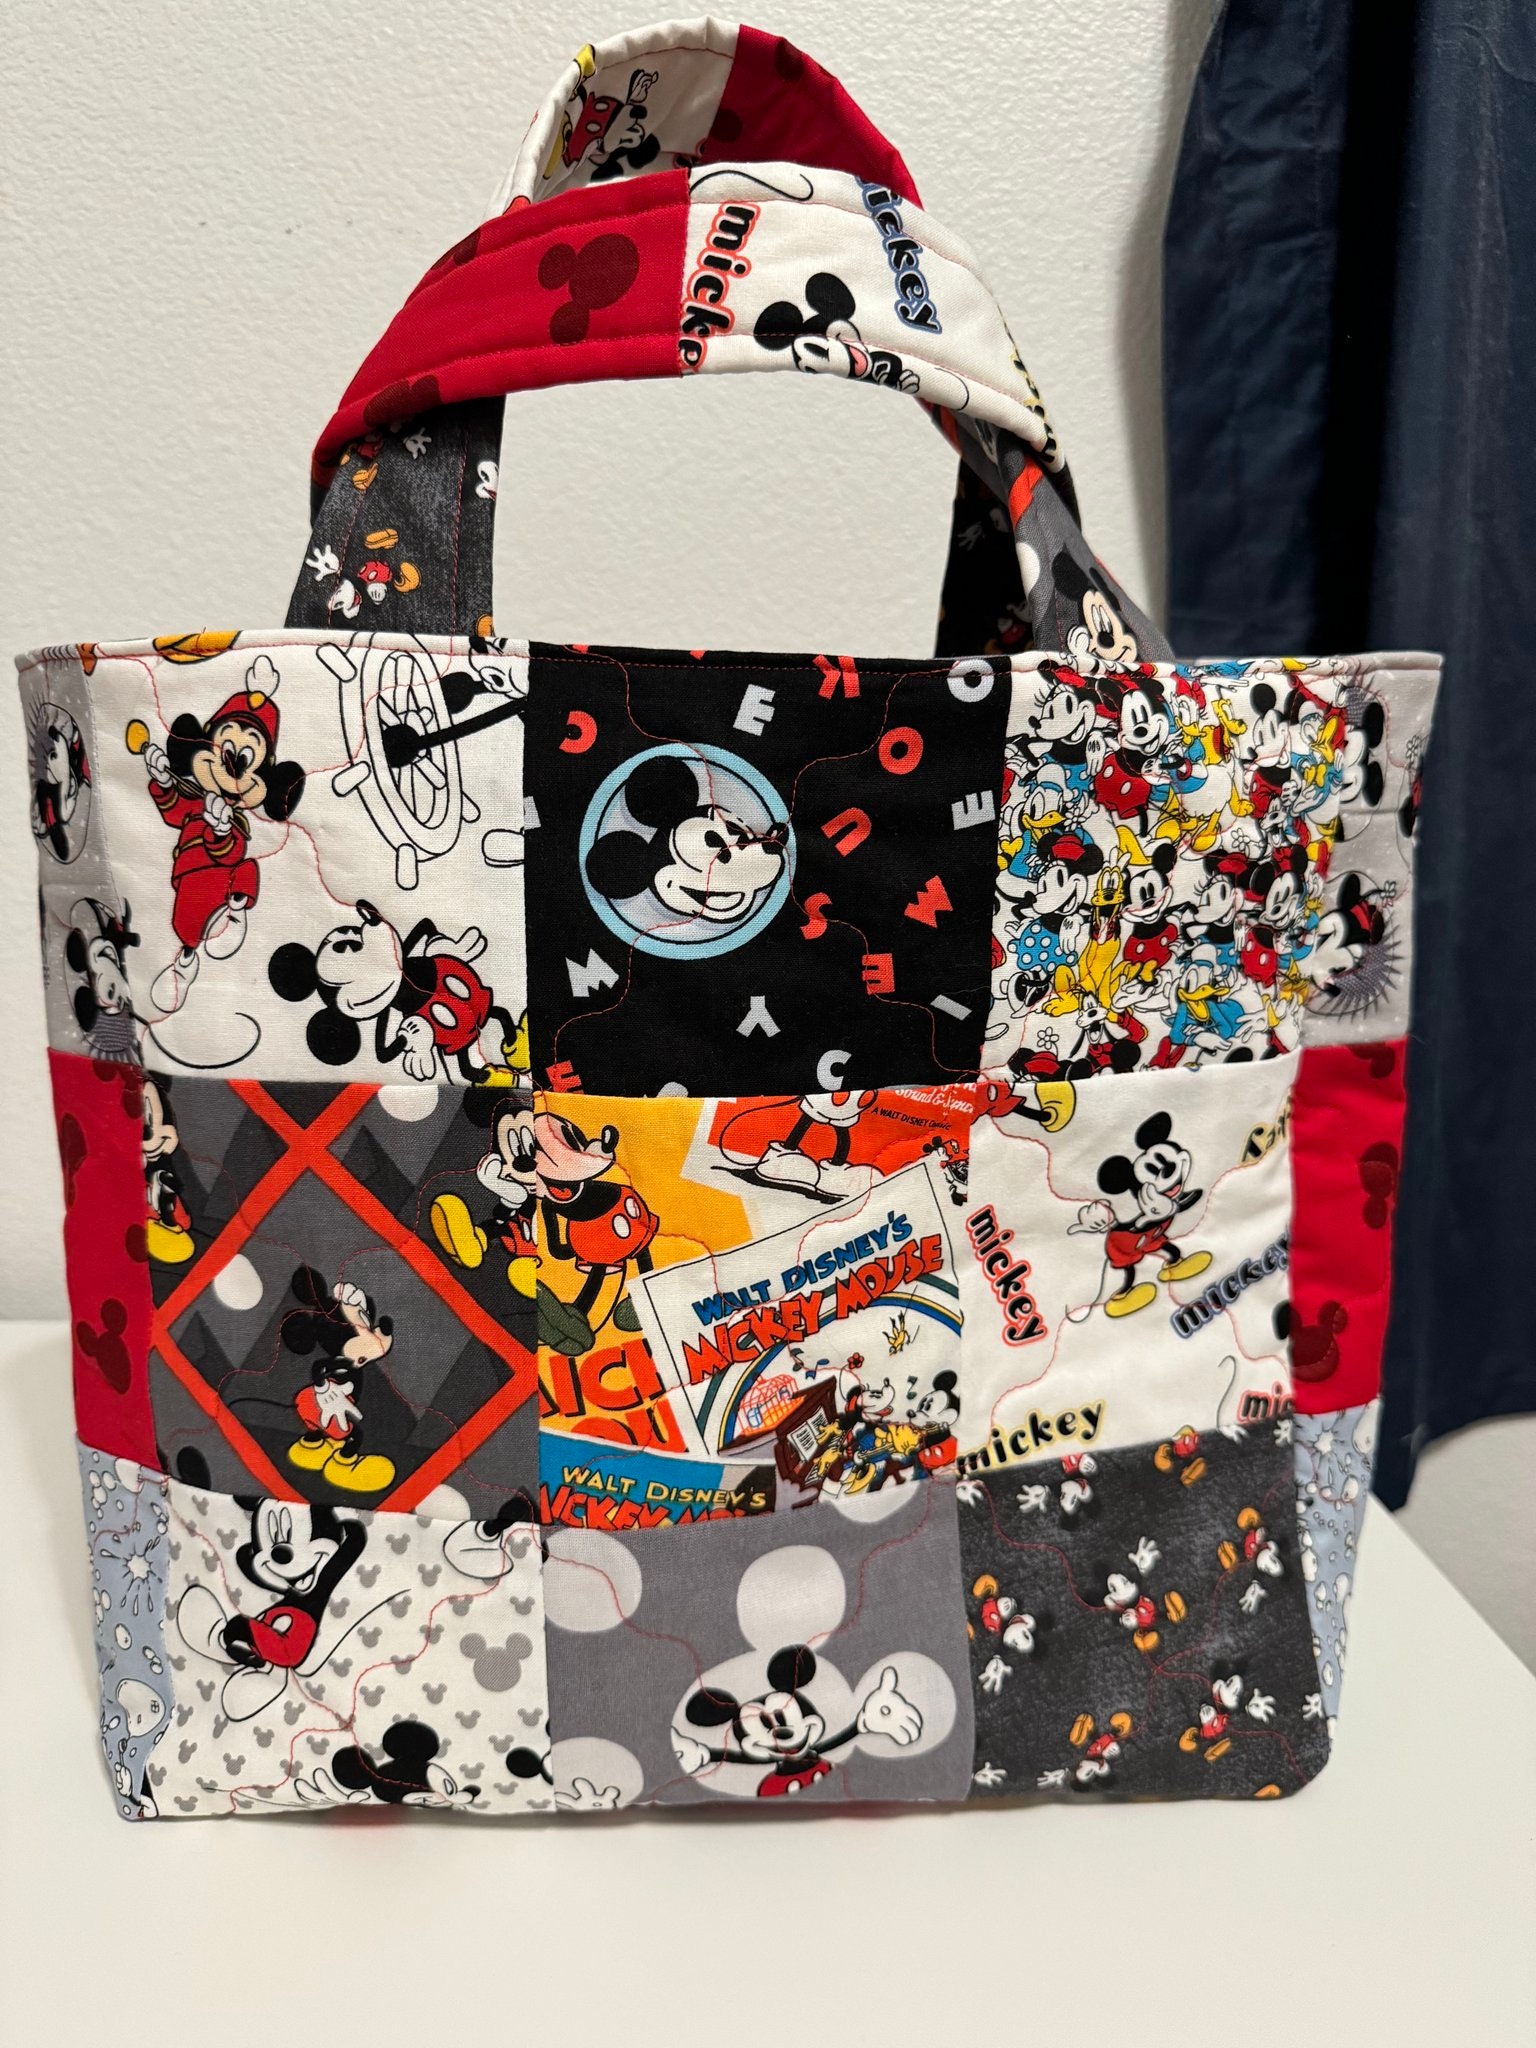 Disneyland-designer-bags-dooney-bourke-mickey-and-minnie-mouse-floral-collection  - MiceChat